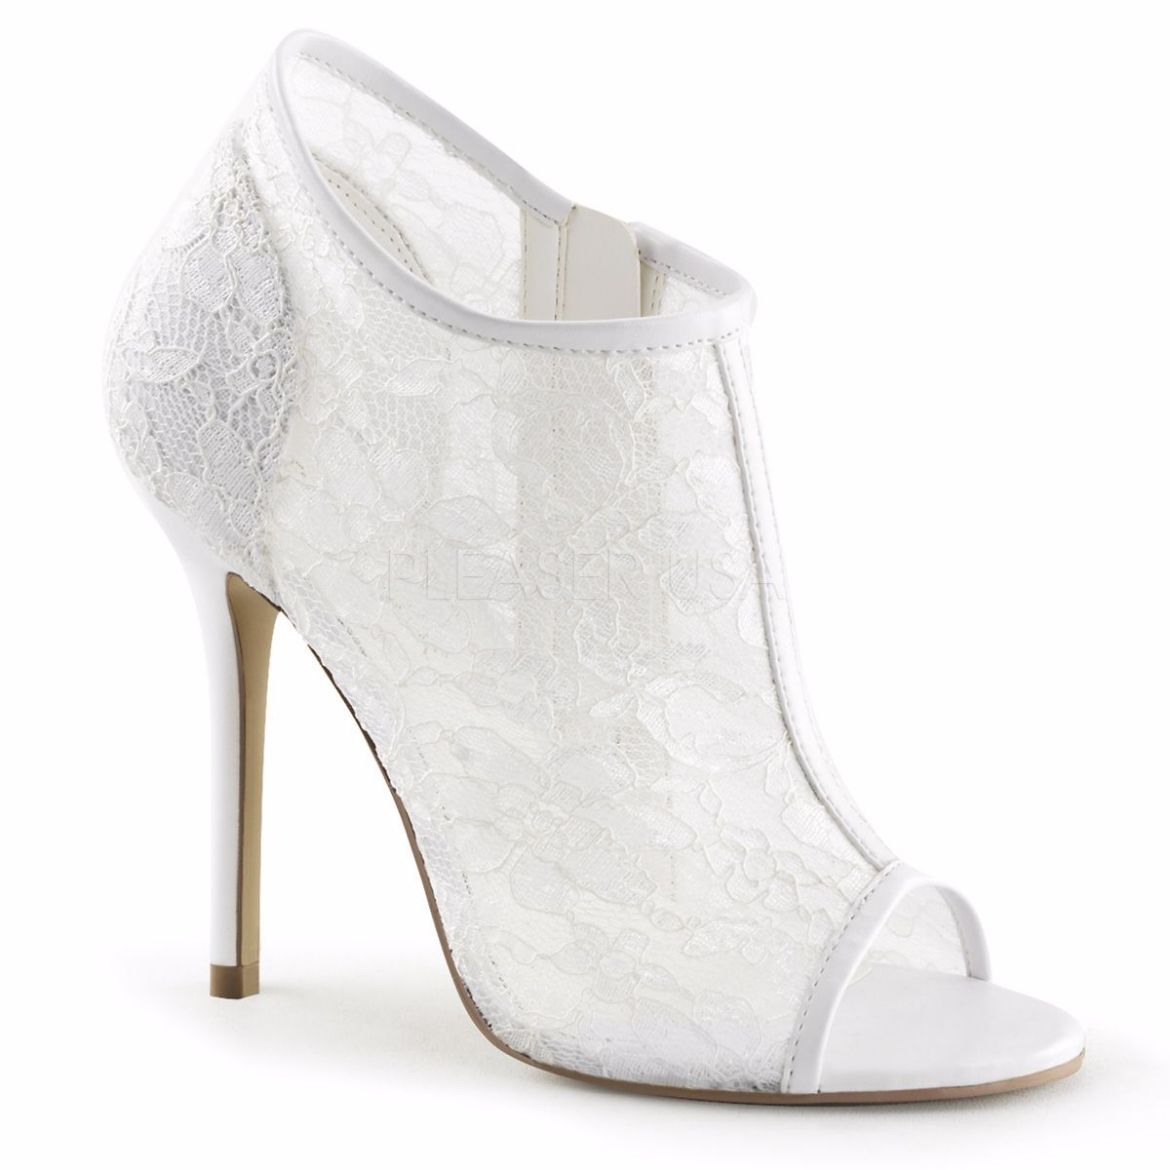 Product image of Fabulicious Amuse-56 Ivory Lace-Mesh, 5 inch (12.7 cm) Heel, Sandal Shoes